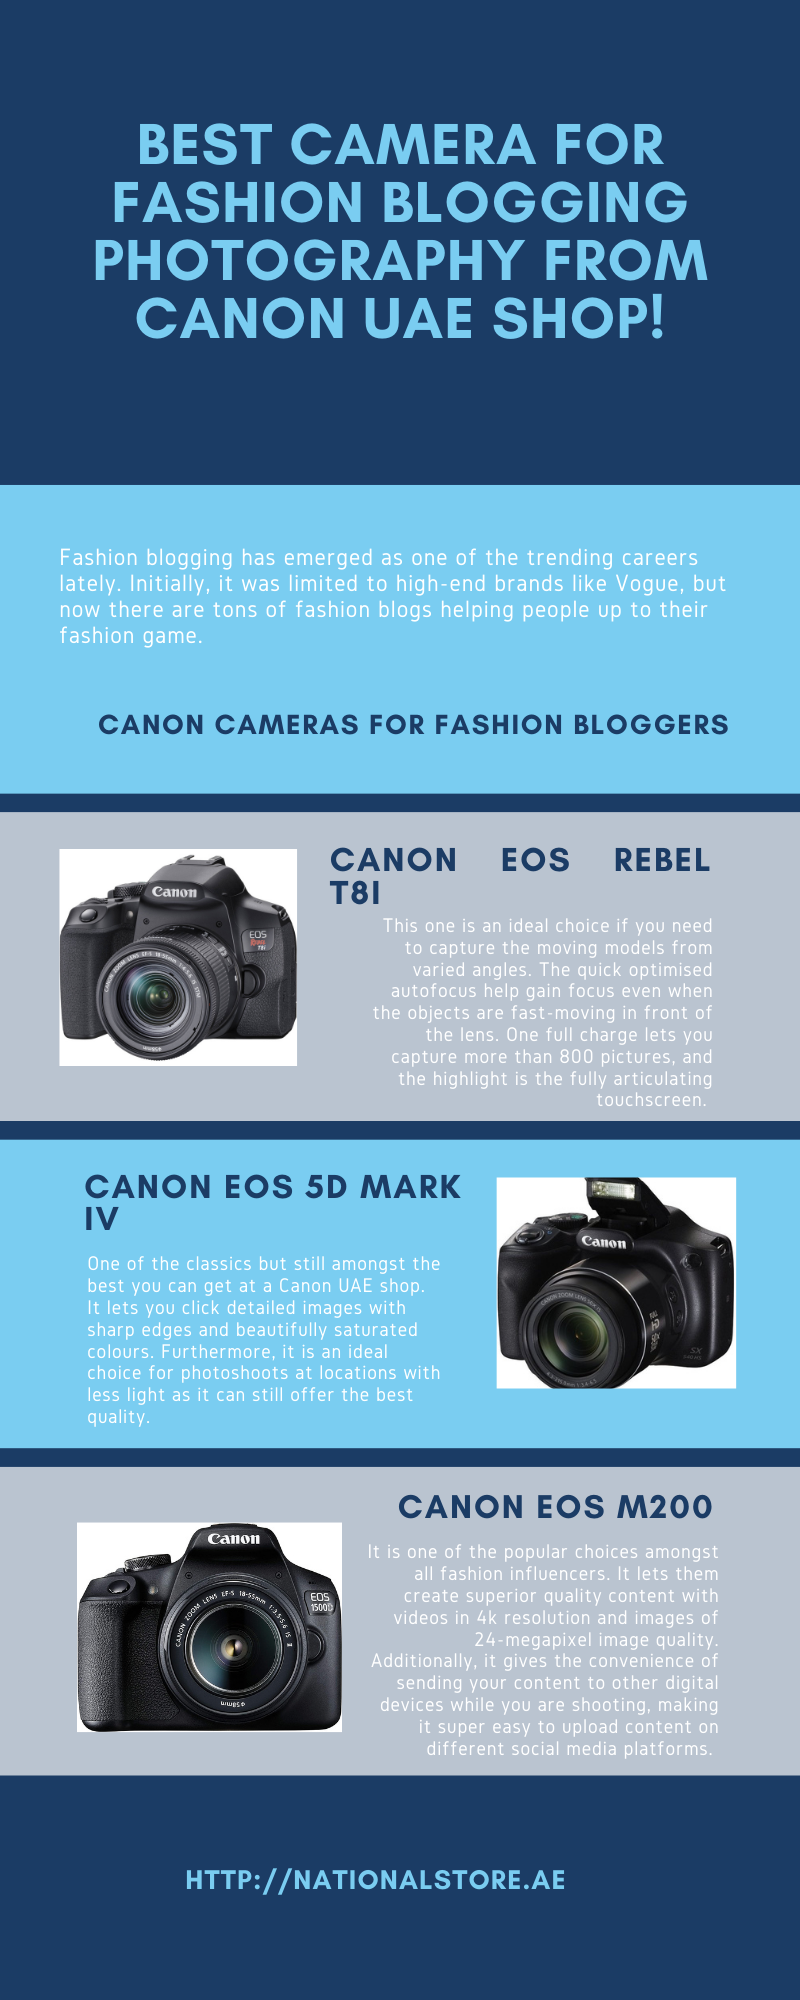 Best camera for fashion blogging photography from Canon UAE Shop! Fashion blogging has emerged as one of the trending careers lately. Initially, it was limited to high-end brands like Vogue, but now there are tons of fashion blogs helping people up to their fashion game.  https://nationalstore.ae/brands/canon-distributo by National Store LLC